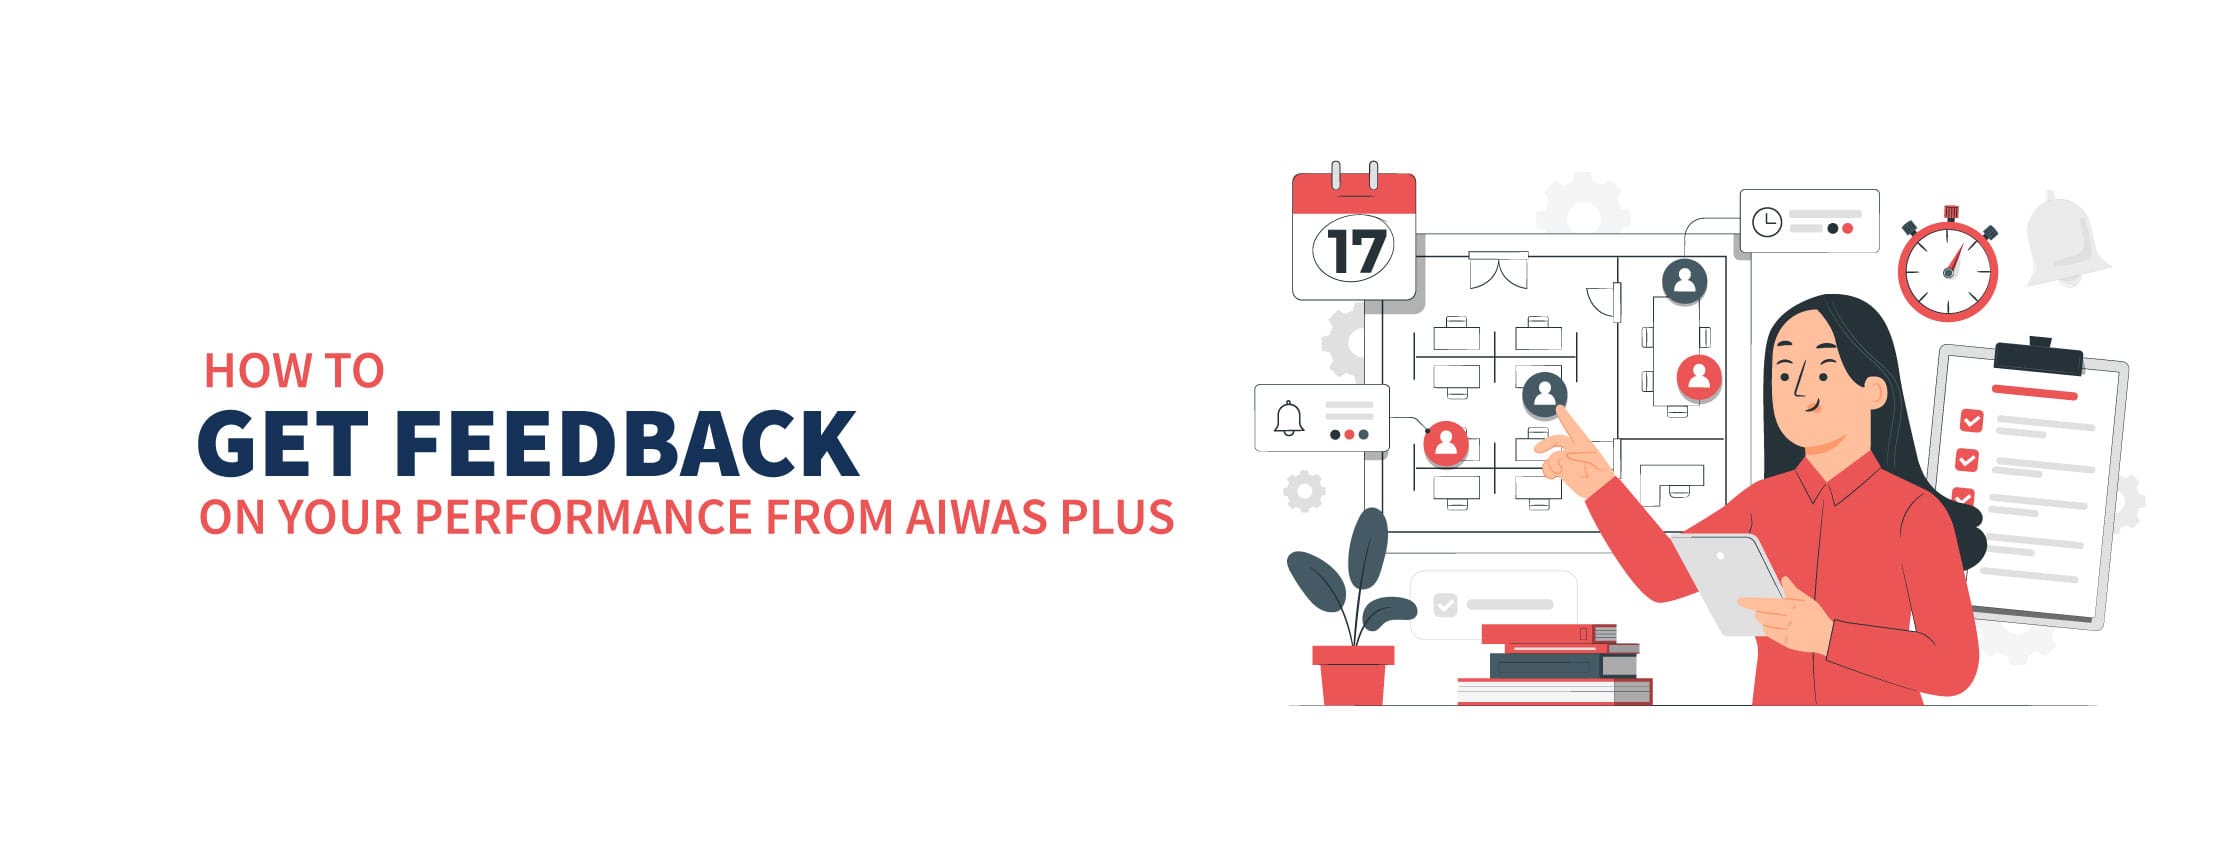 How to Get Feedback on Your Performance from AIWAS Plus